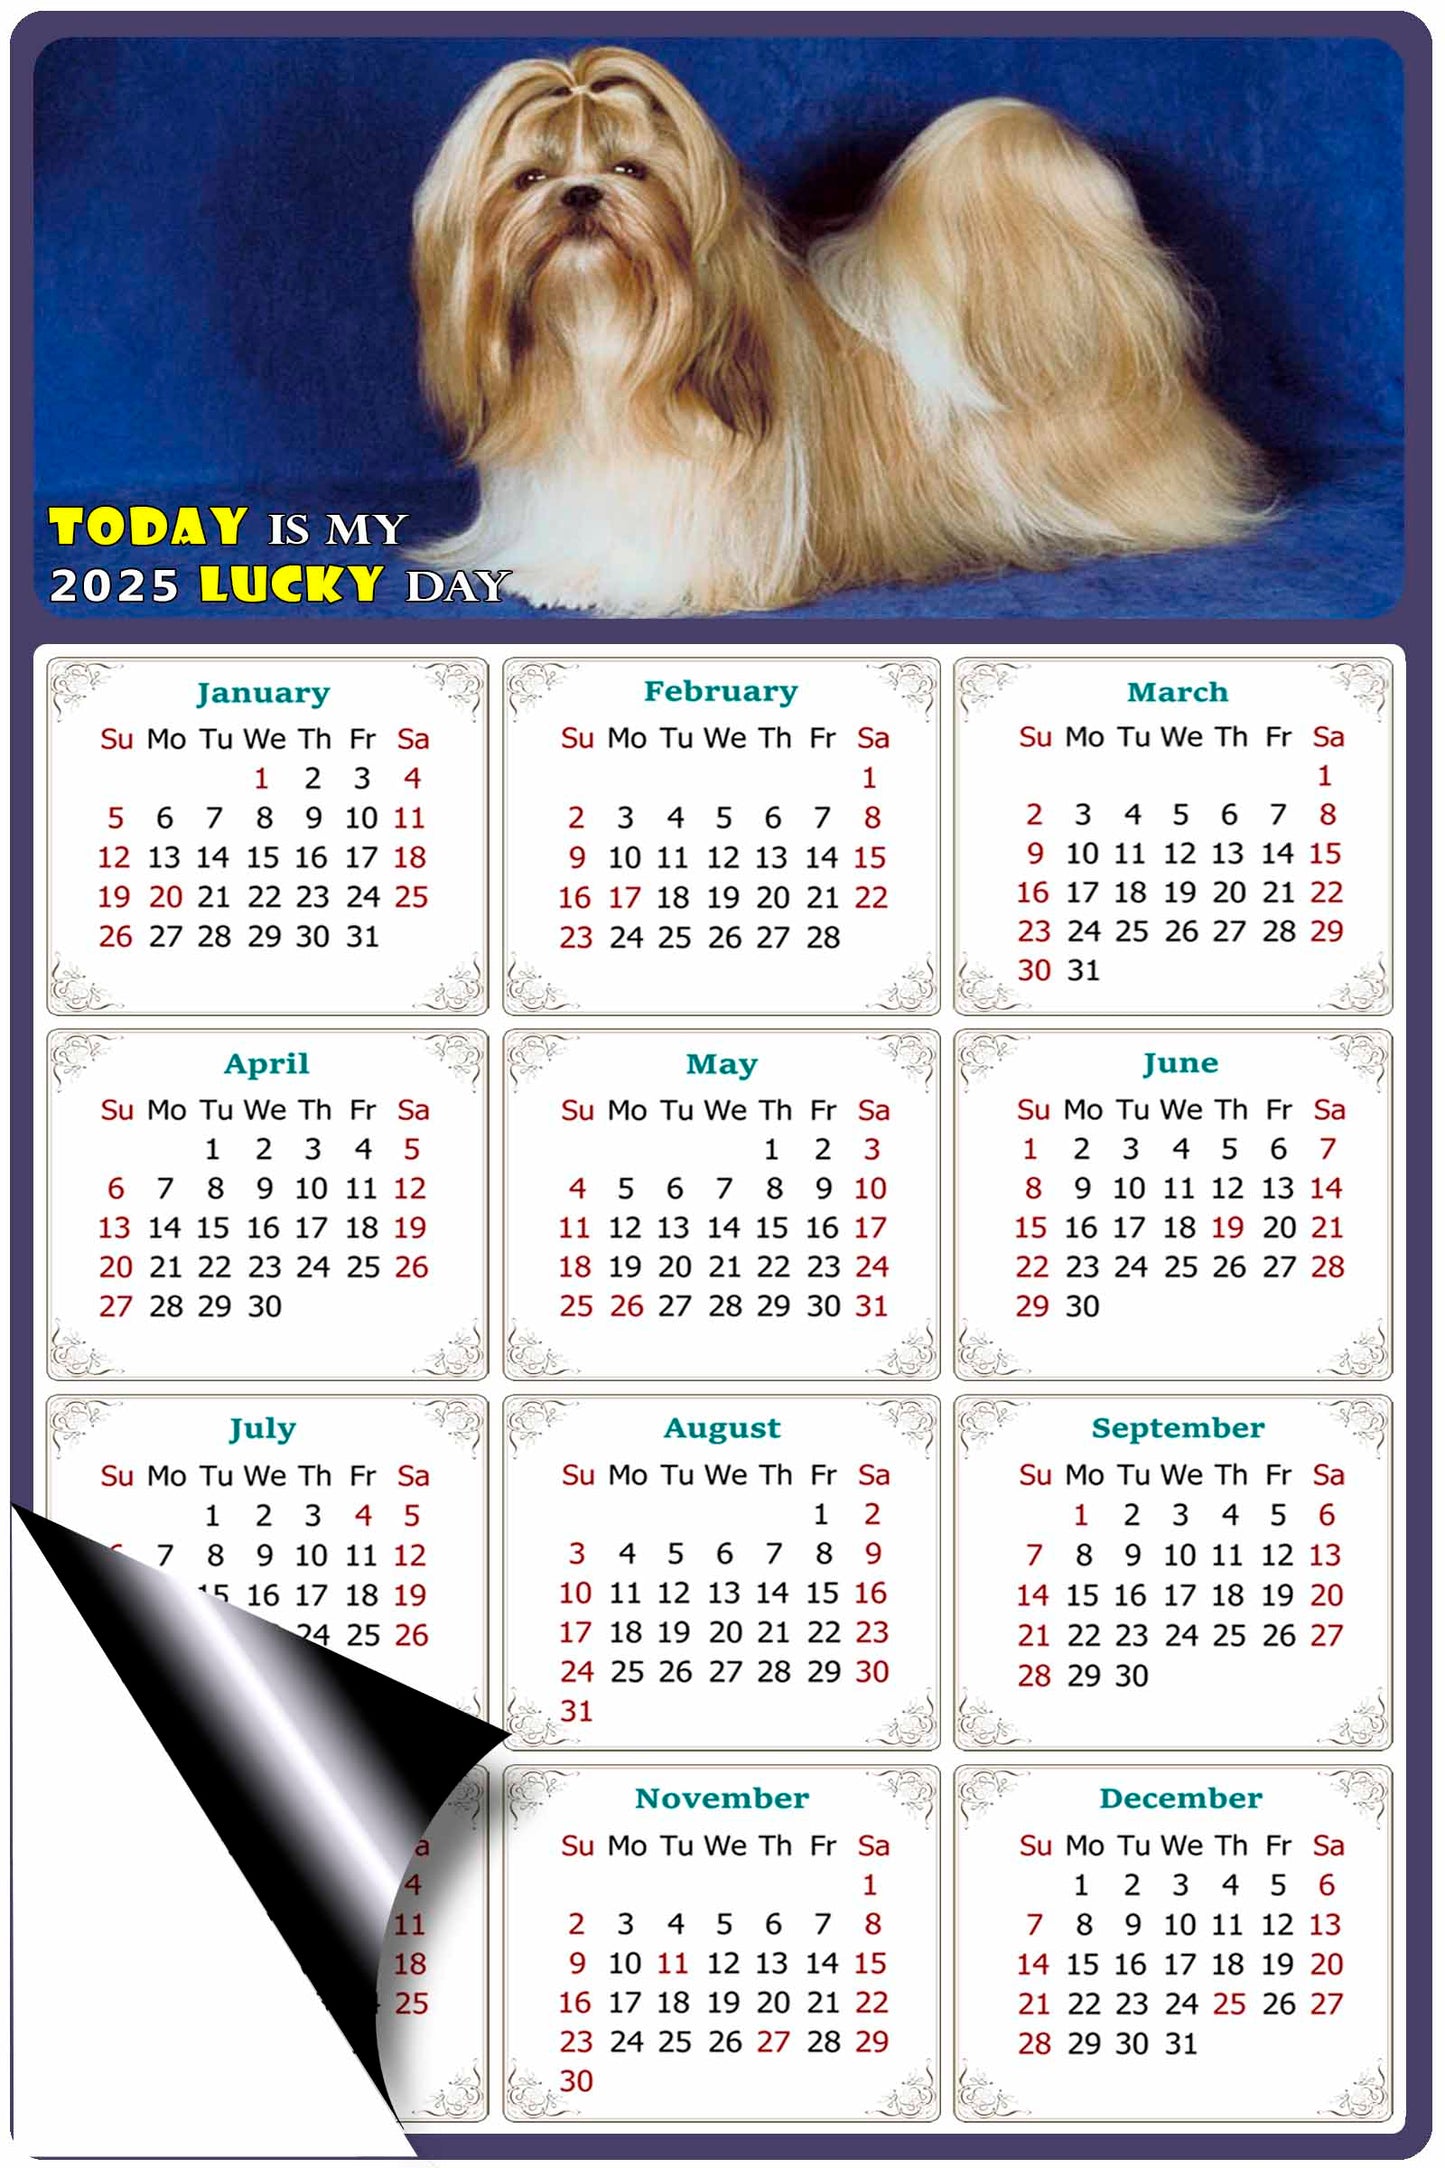 2025 Magnetic Calendar - Today is My Lucky Day (Fade, Tear, and Water Resistant)- Dogs Themed 07